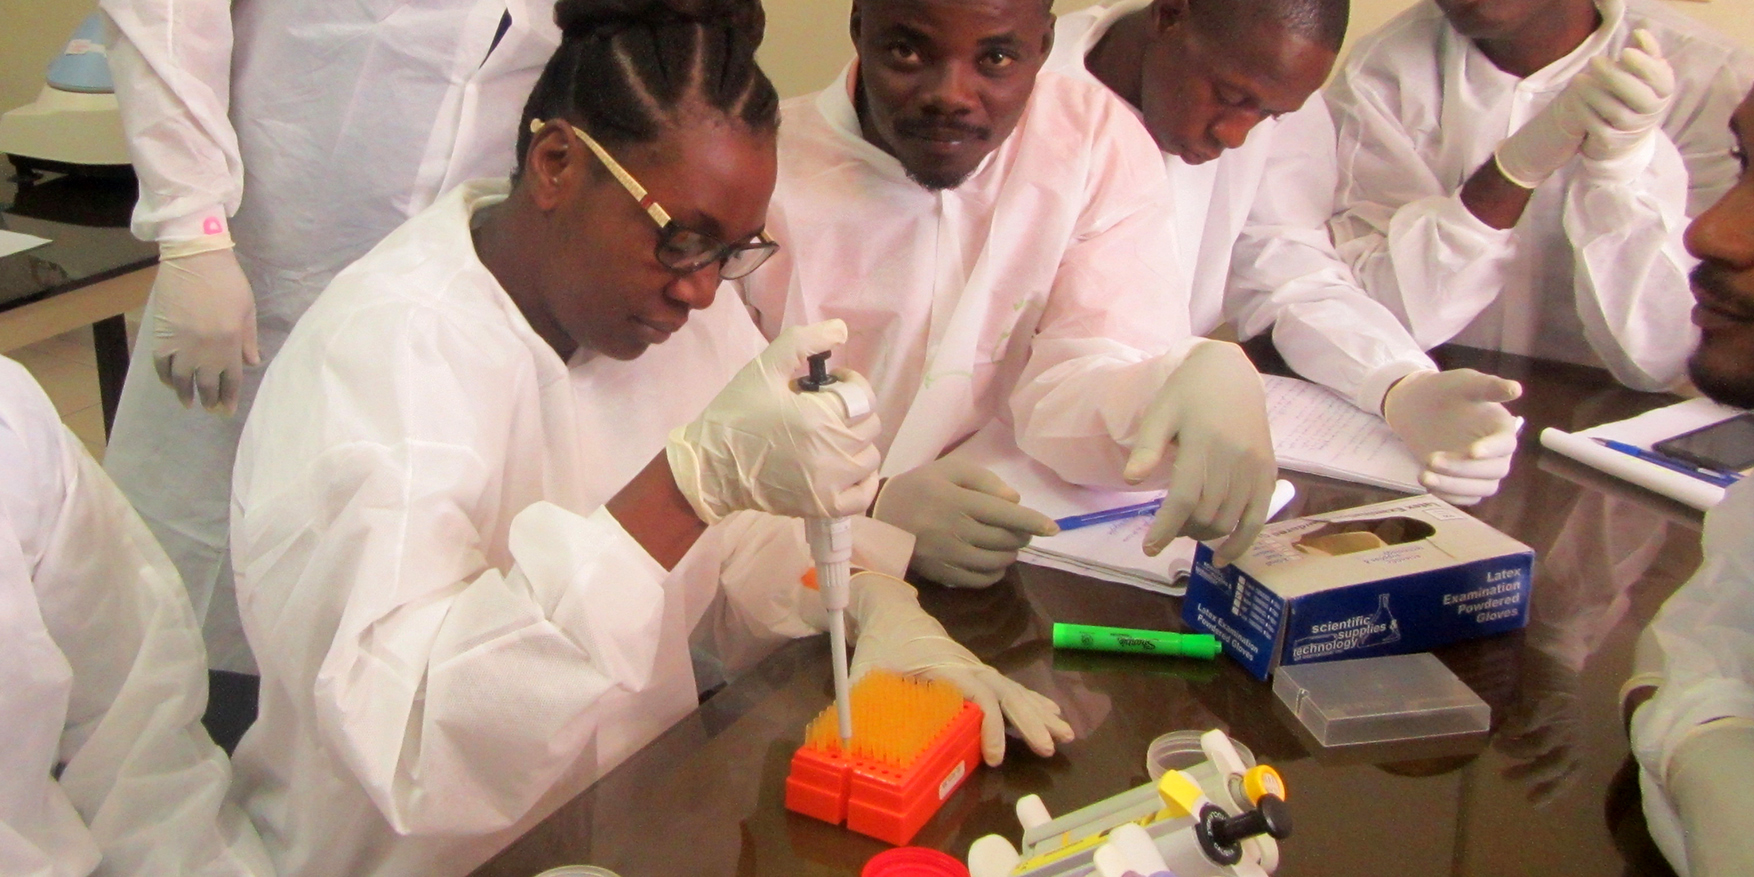 Image of several lab technicians sitting at a large desk as one injects fluid into a test tube.